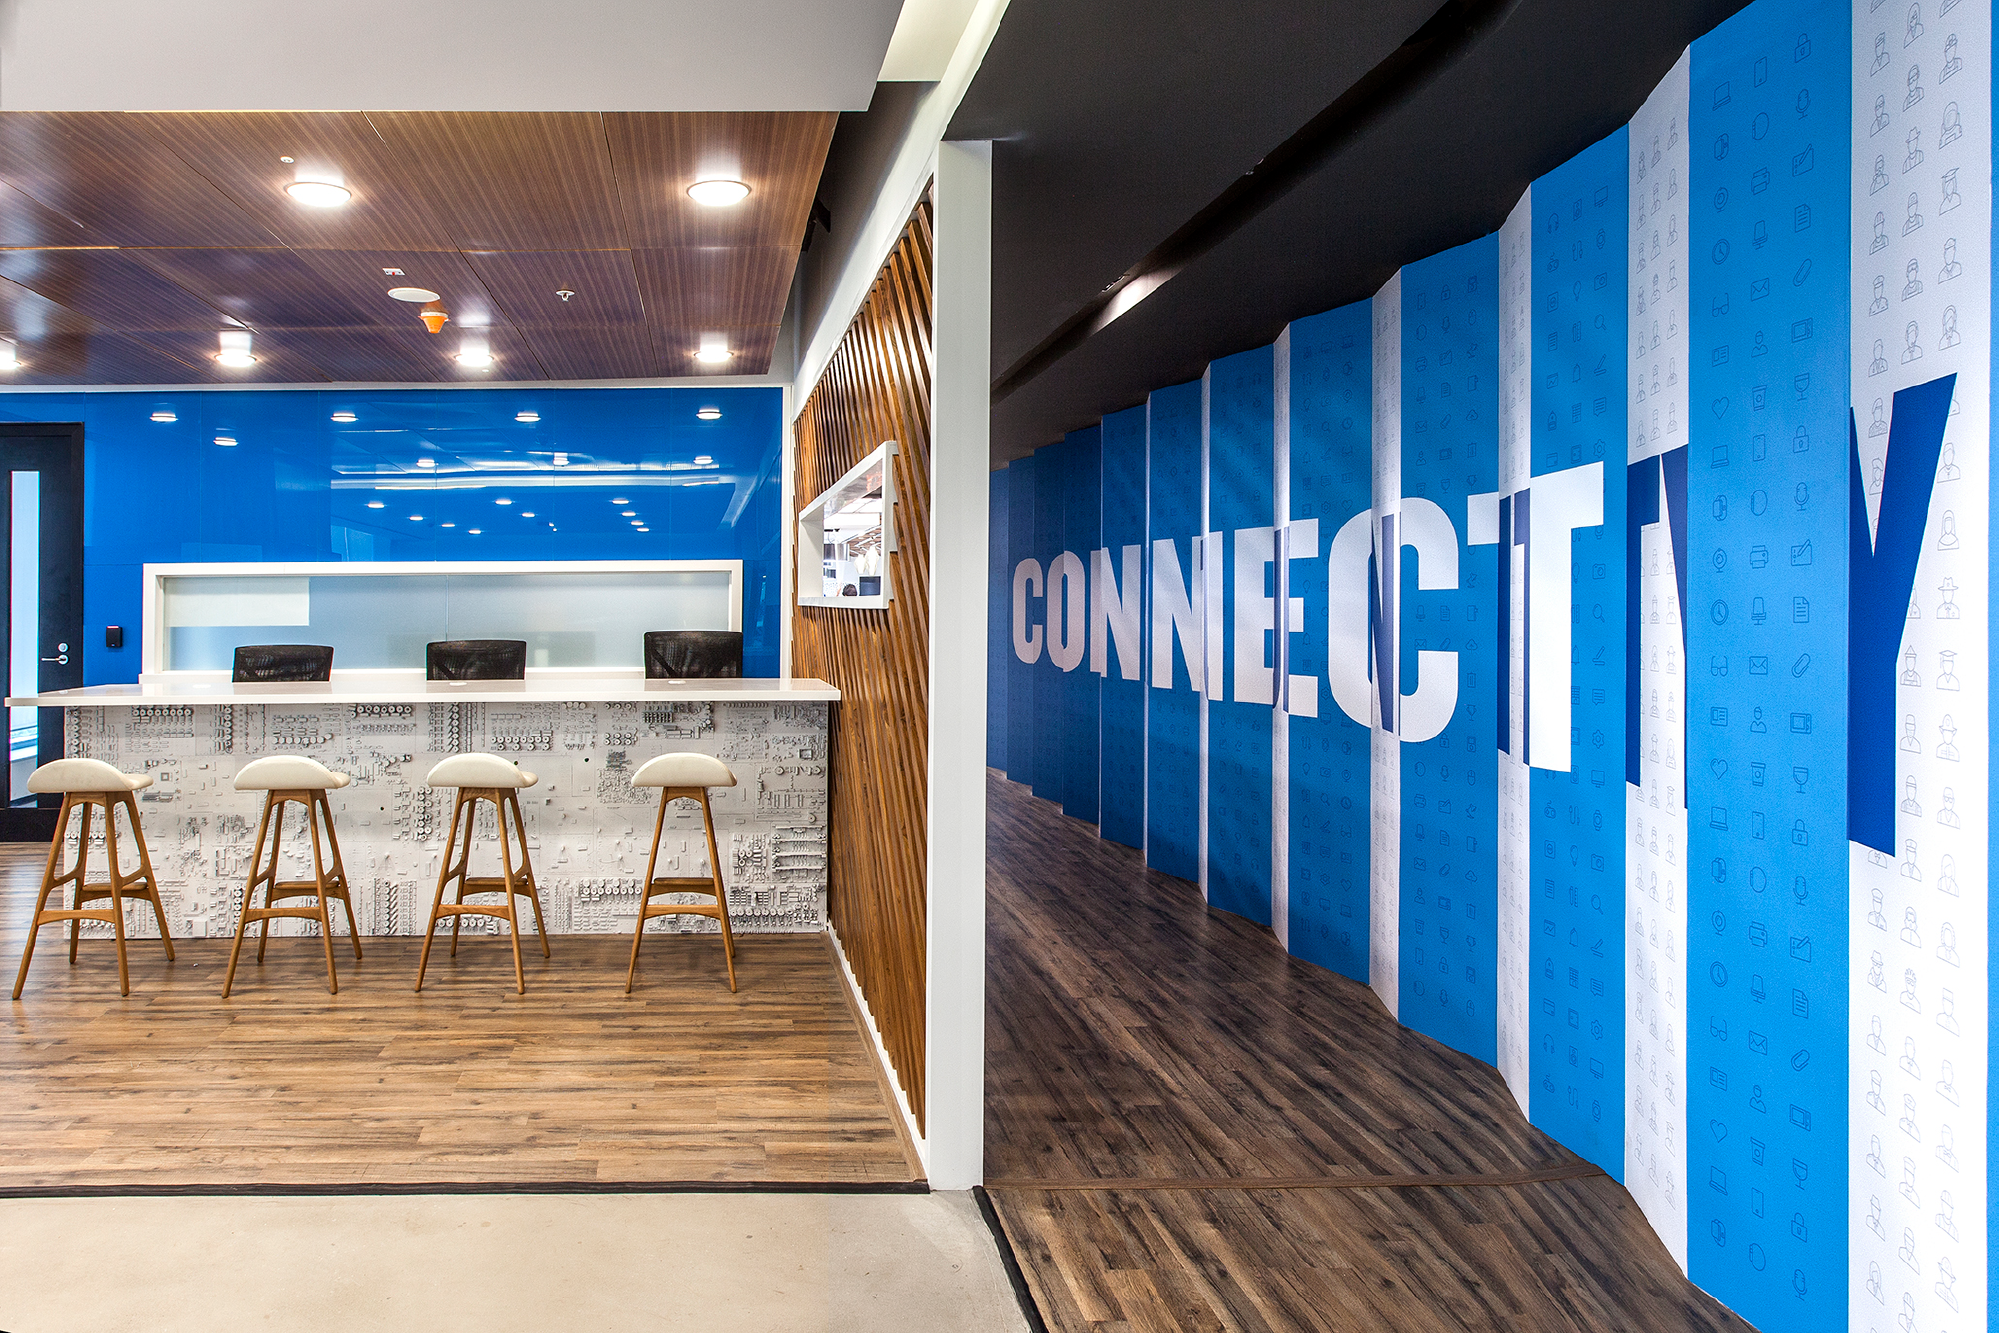 LinkedIn’s Bangalore office interior - designed to provide an immersive environment